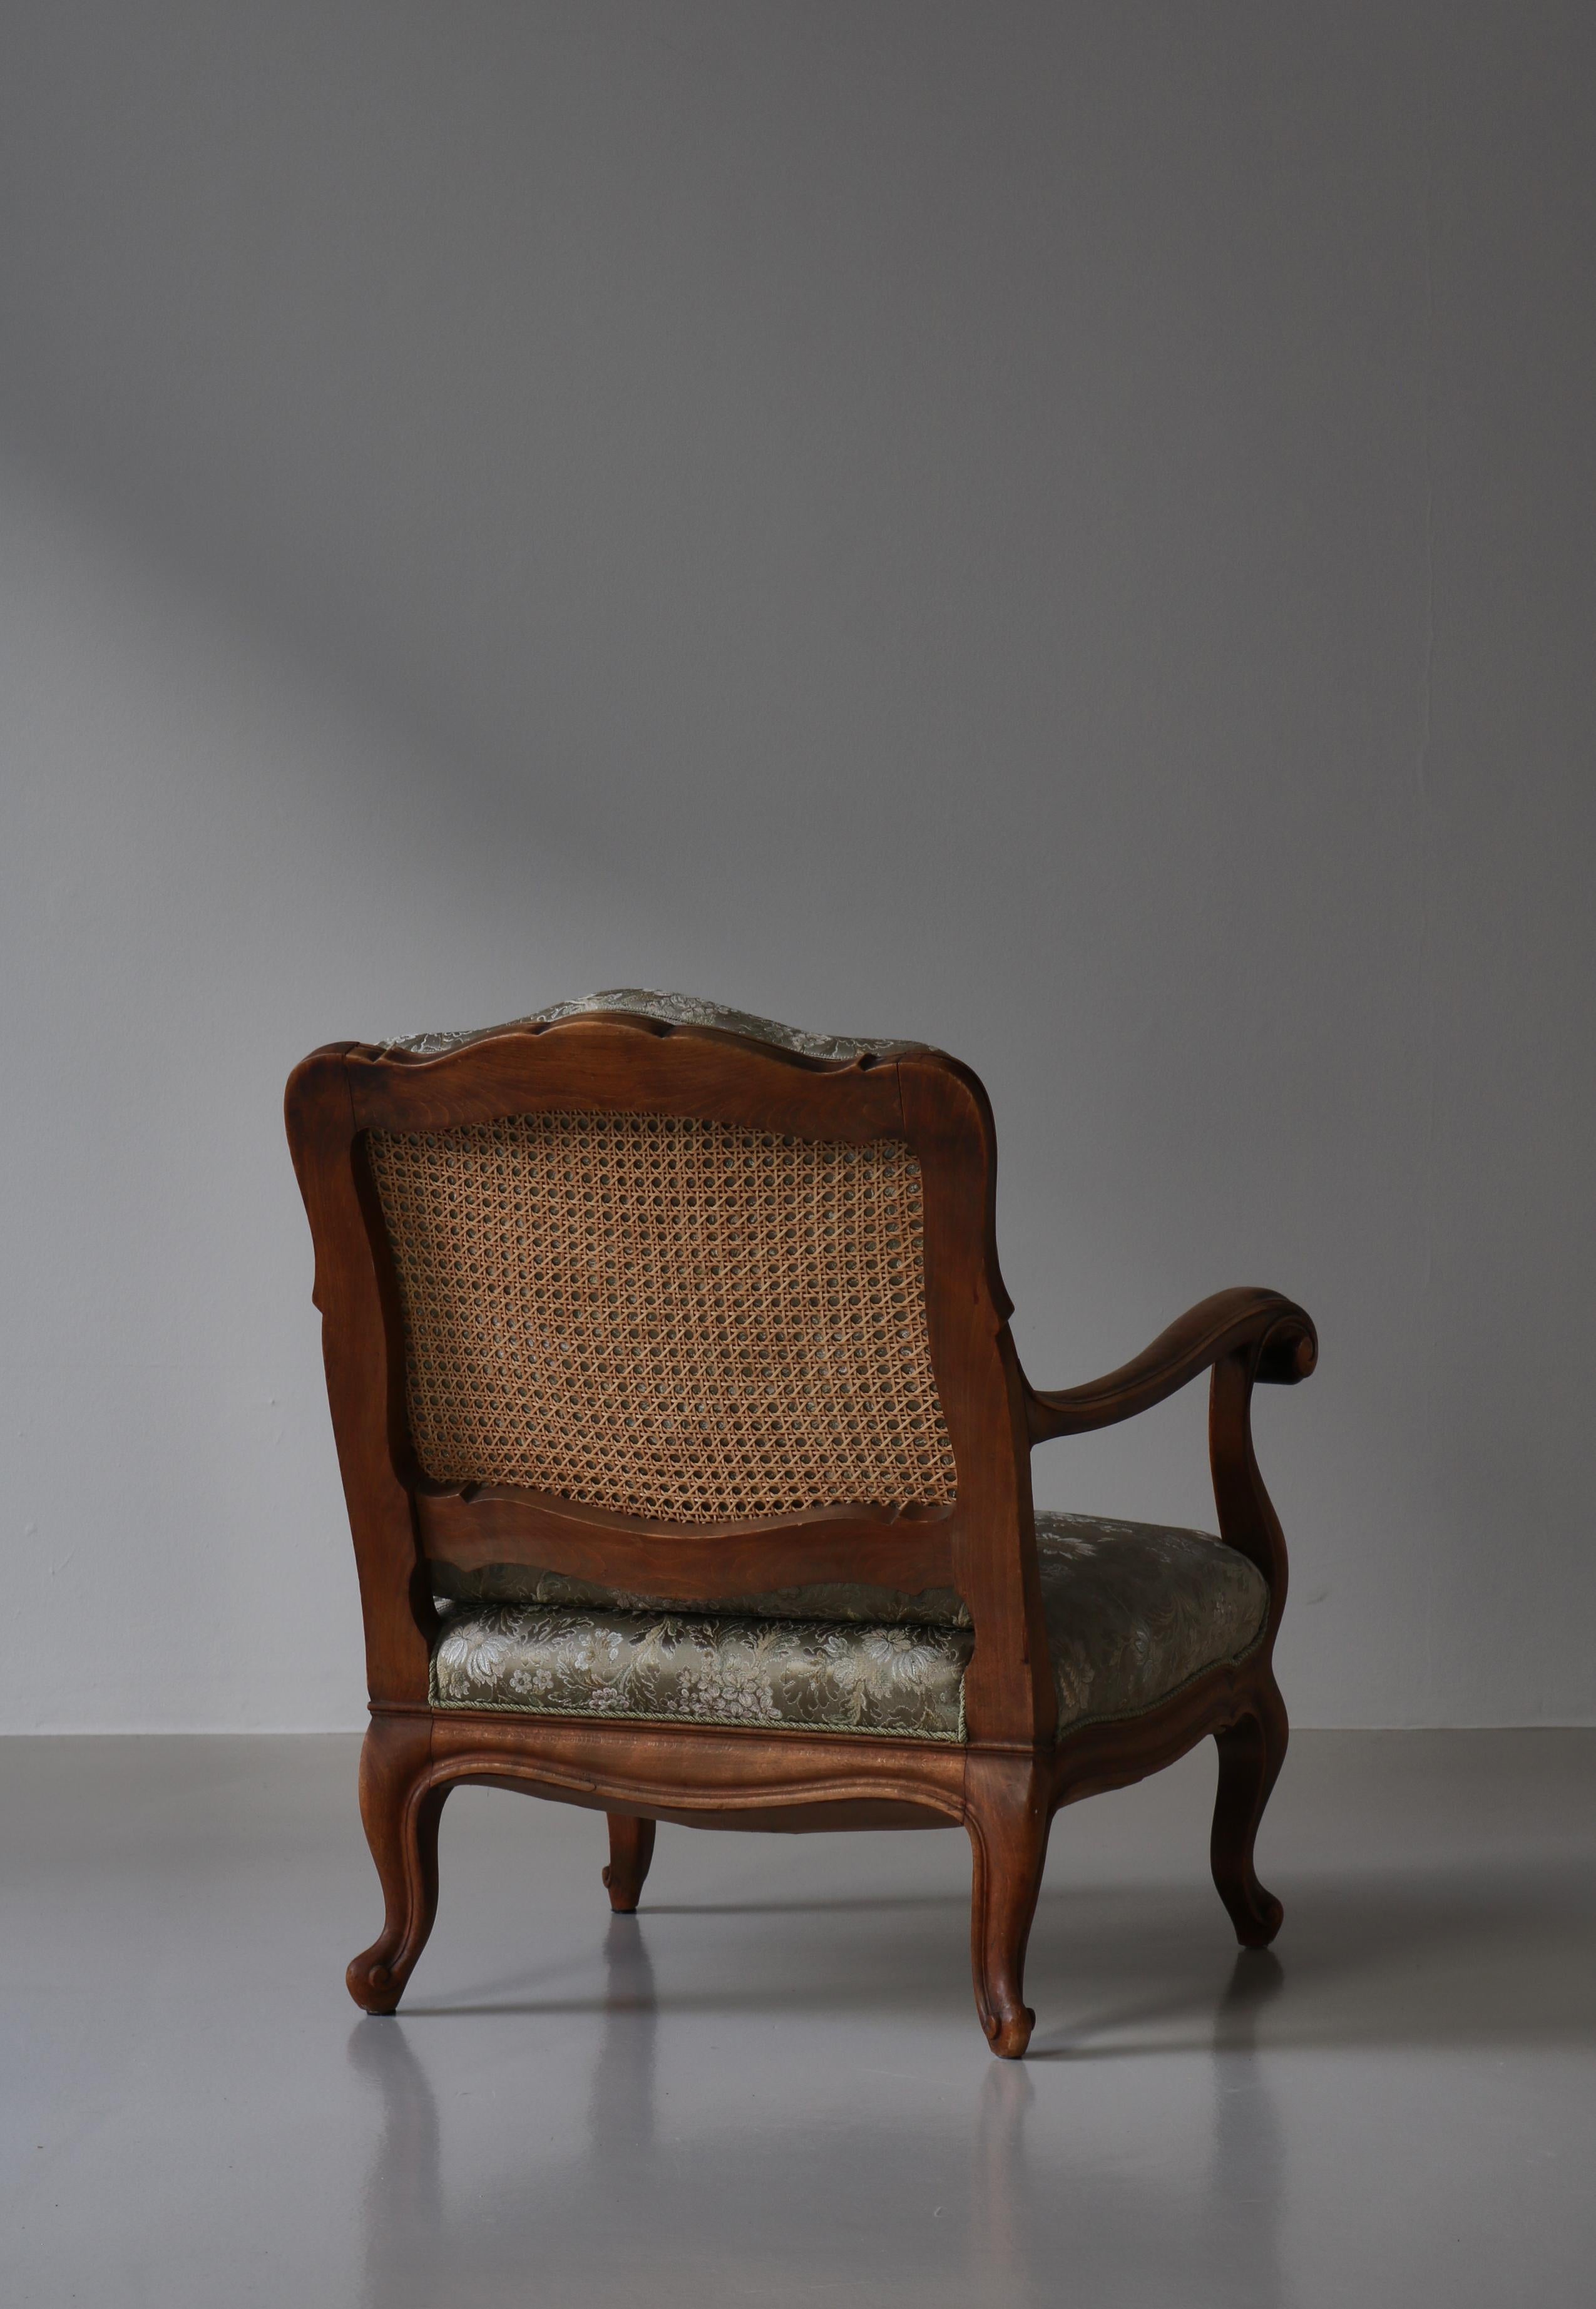 Bergére Chair Rococo Revival by Danish Cabinetmaker, Early 20th Century For Sale 12